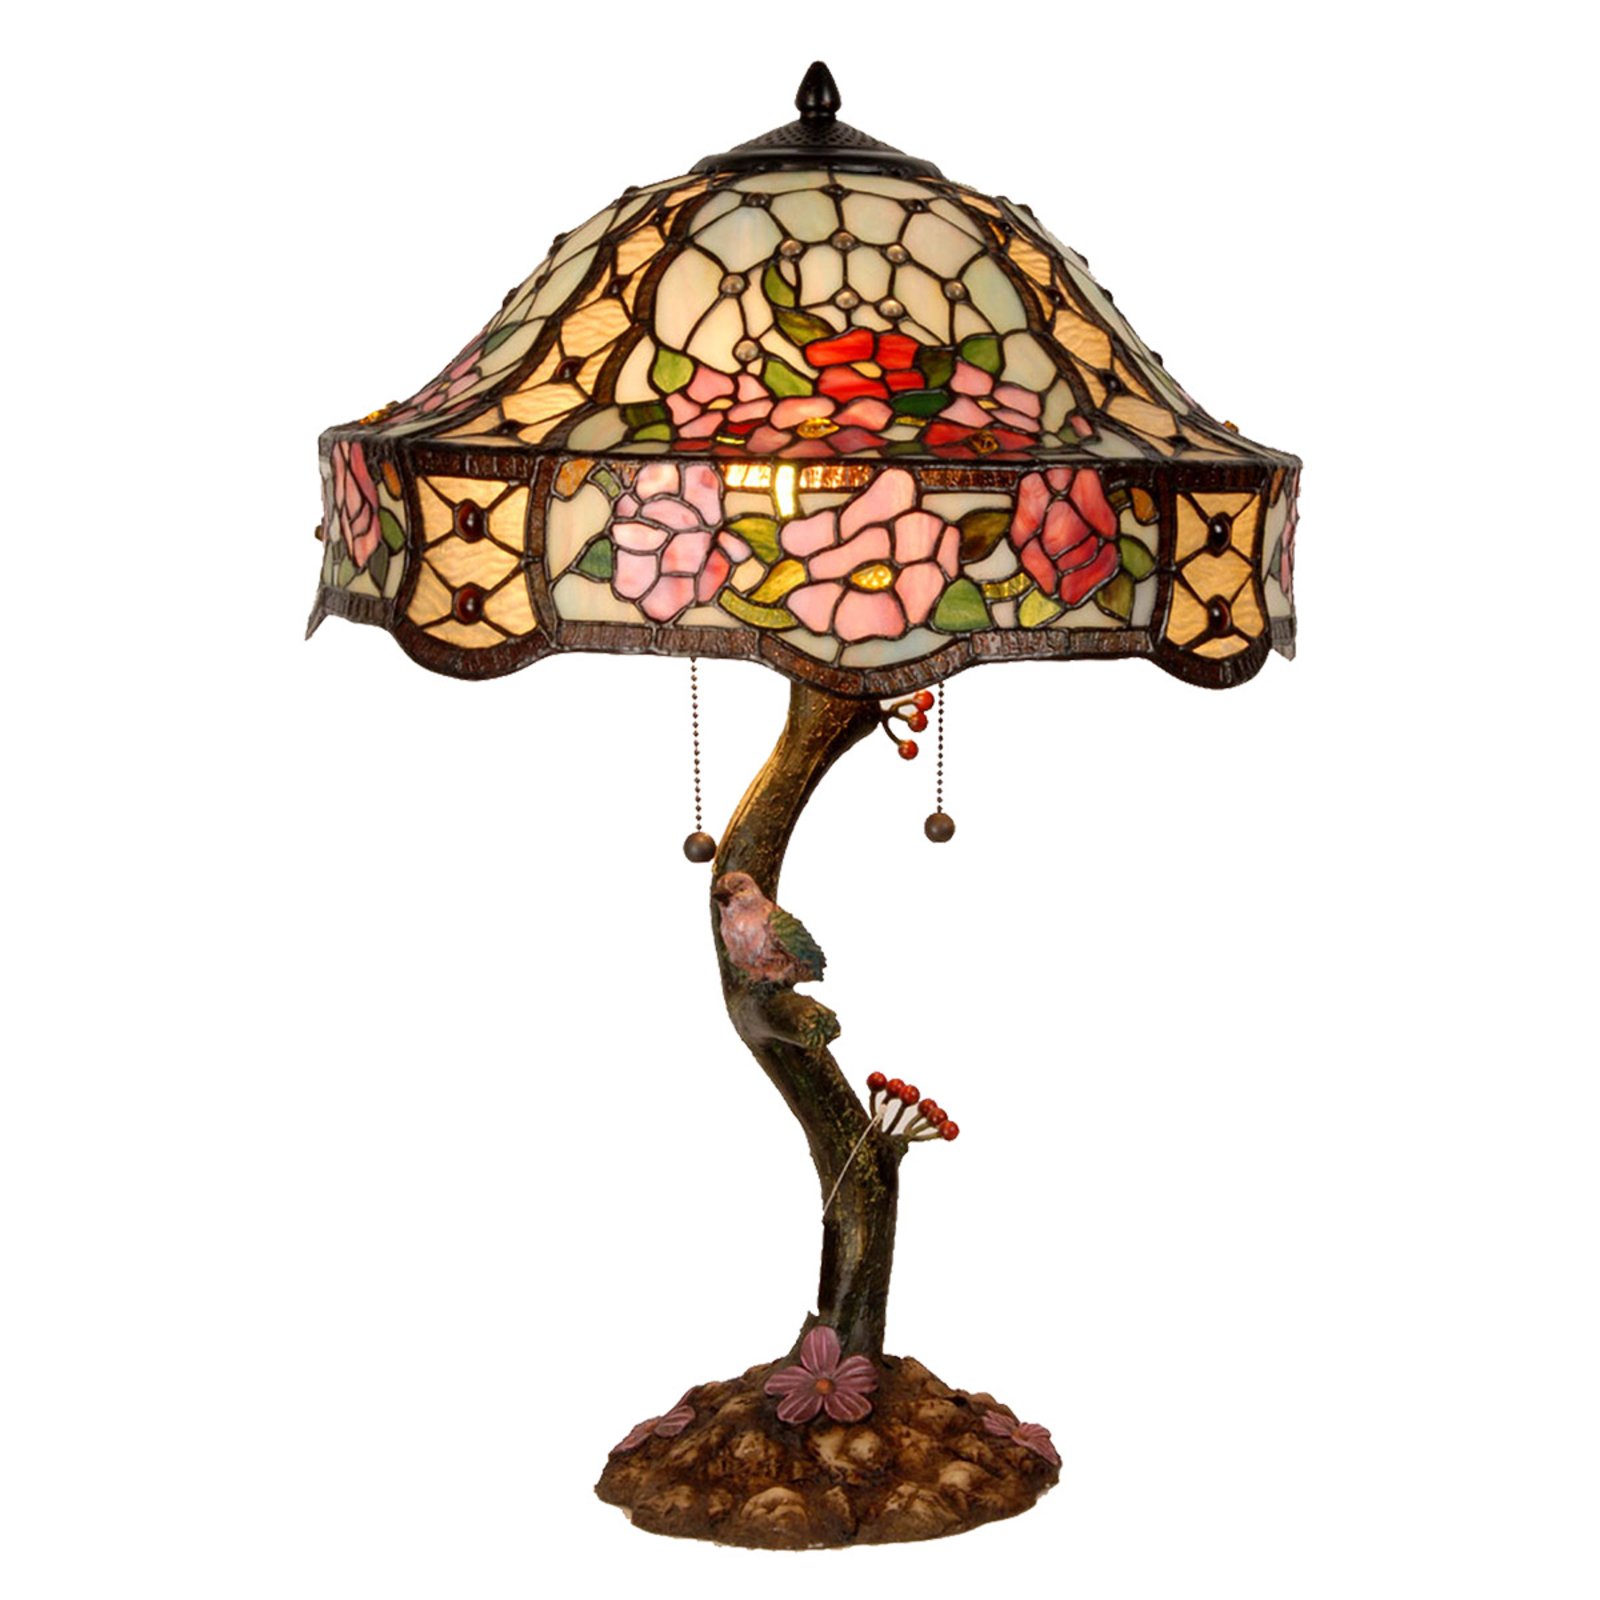 Richly-decorated table lamp Claire